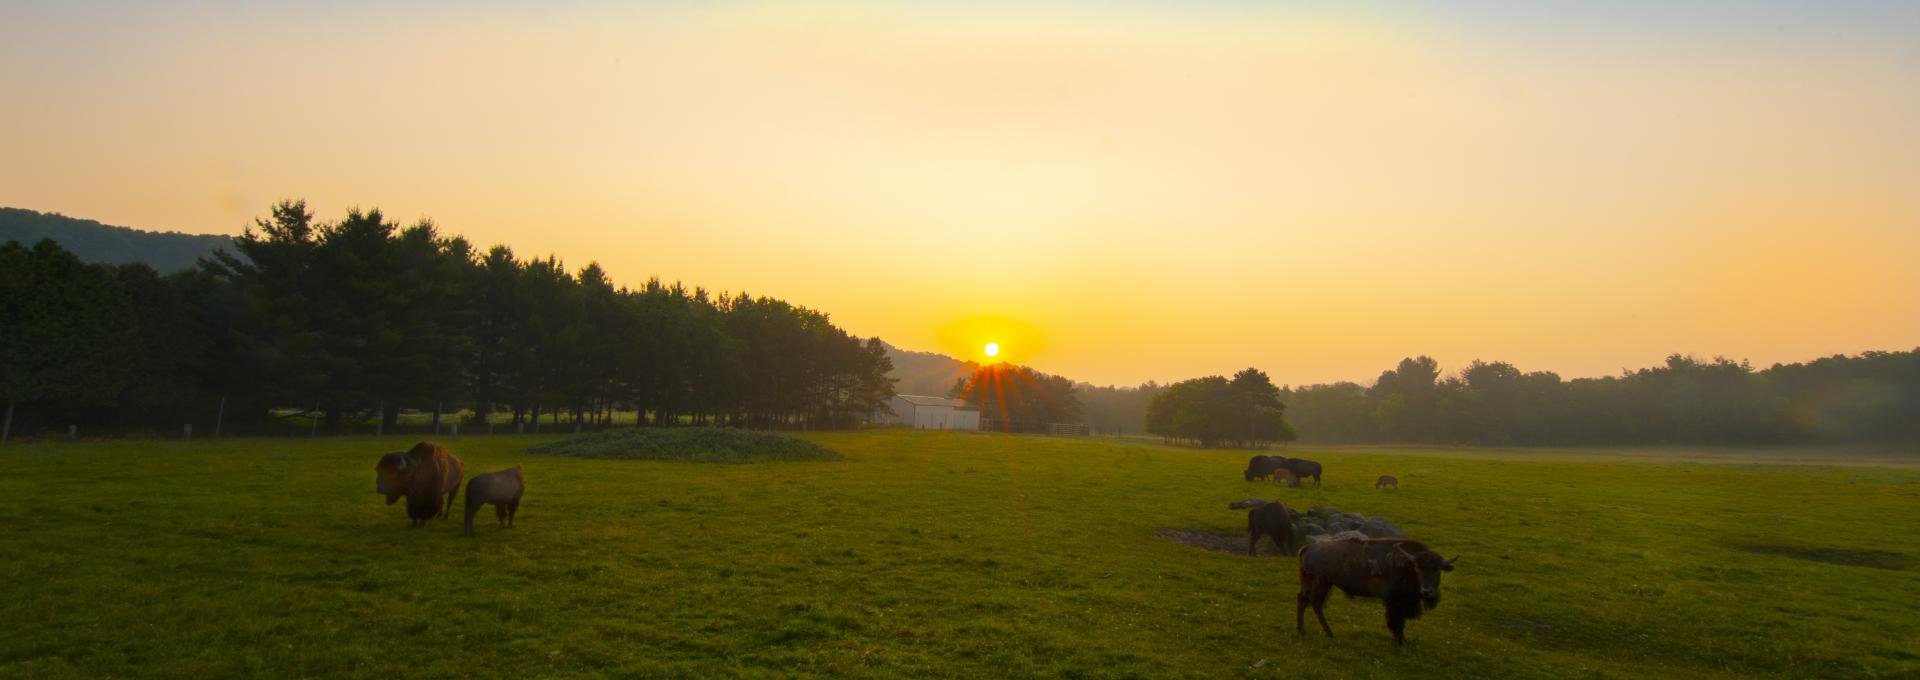 Bison in sunset